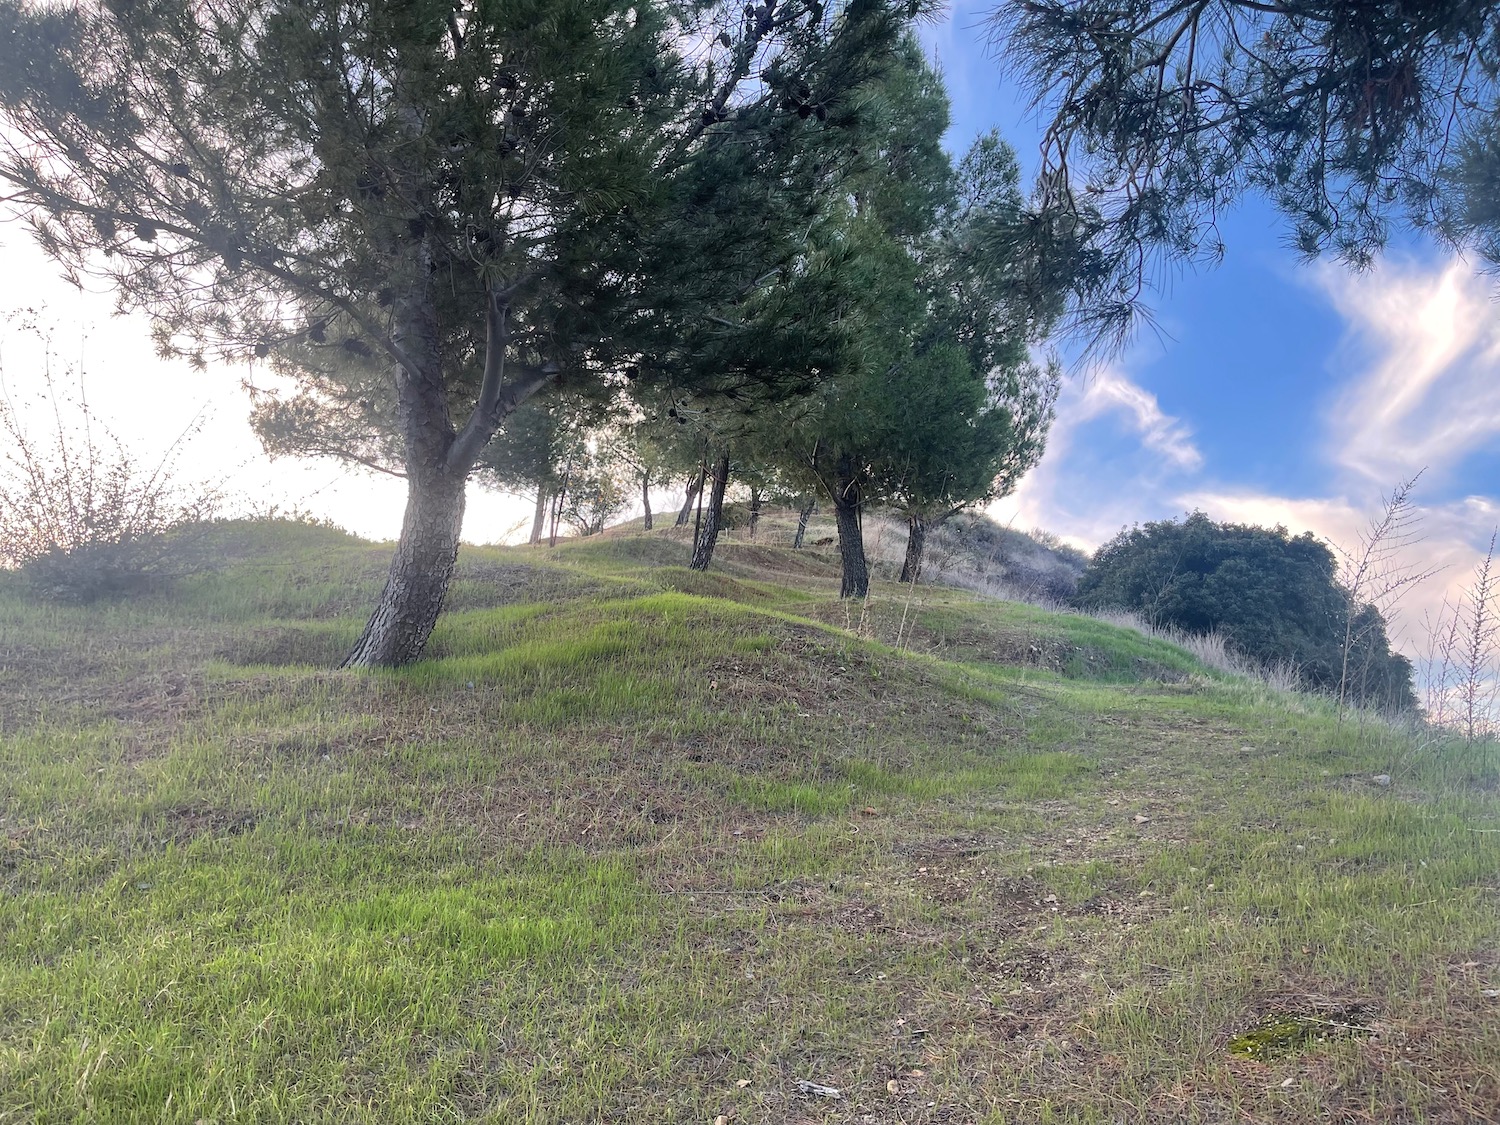 a grassy hill with trees and blue sky